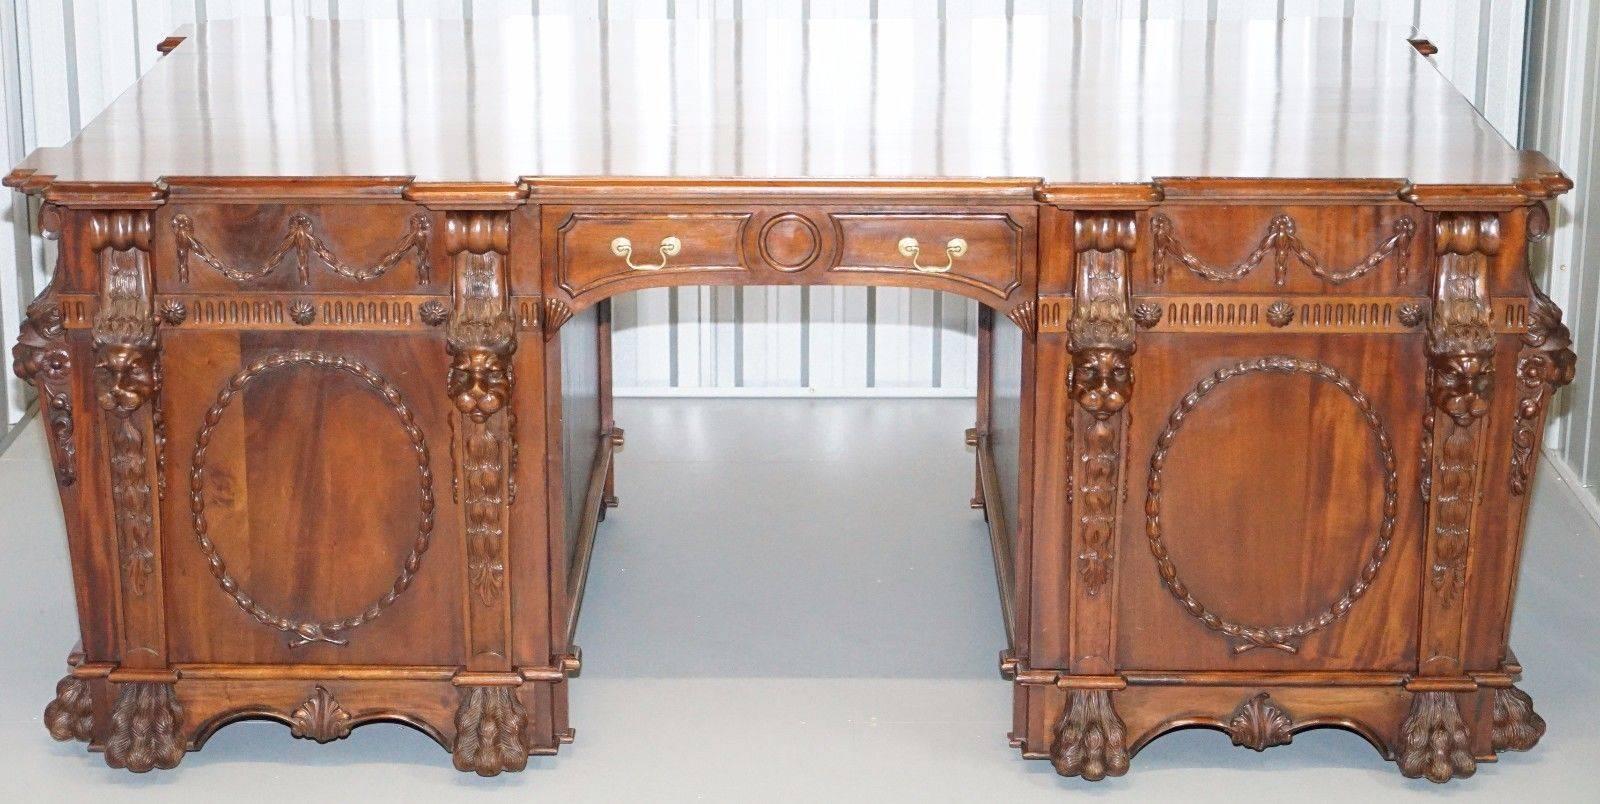 Hand-Carved Victorian Pedestal Partner Desk Based on 1767 Thomas Chippendale Nostell Priory